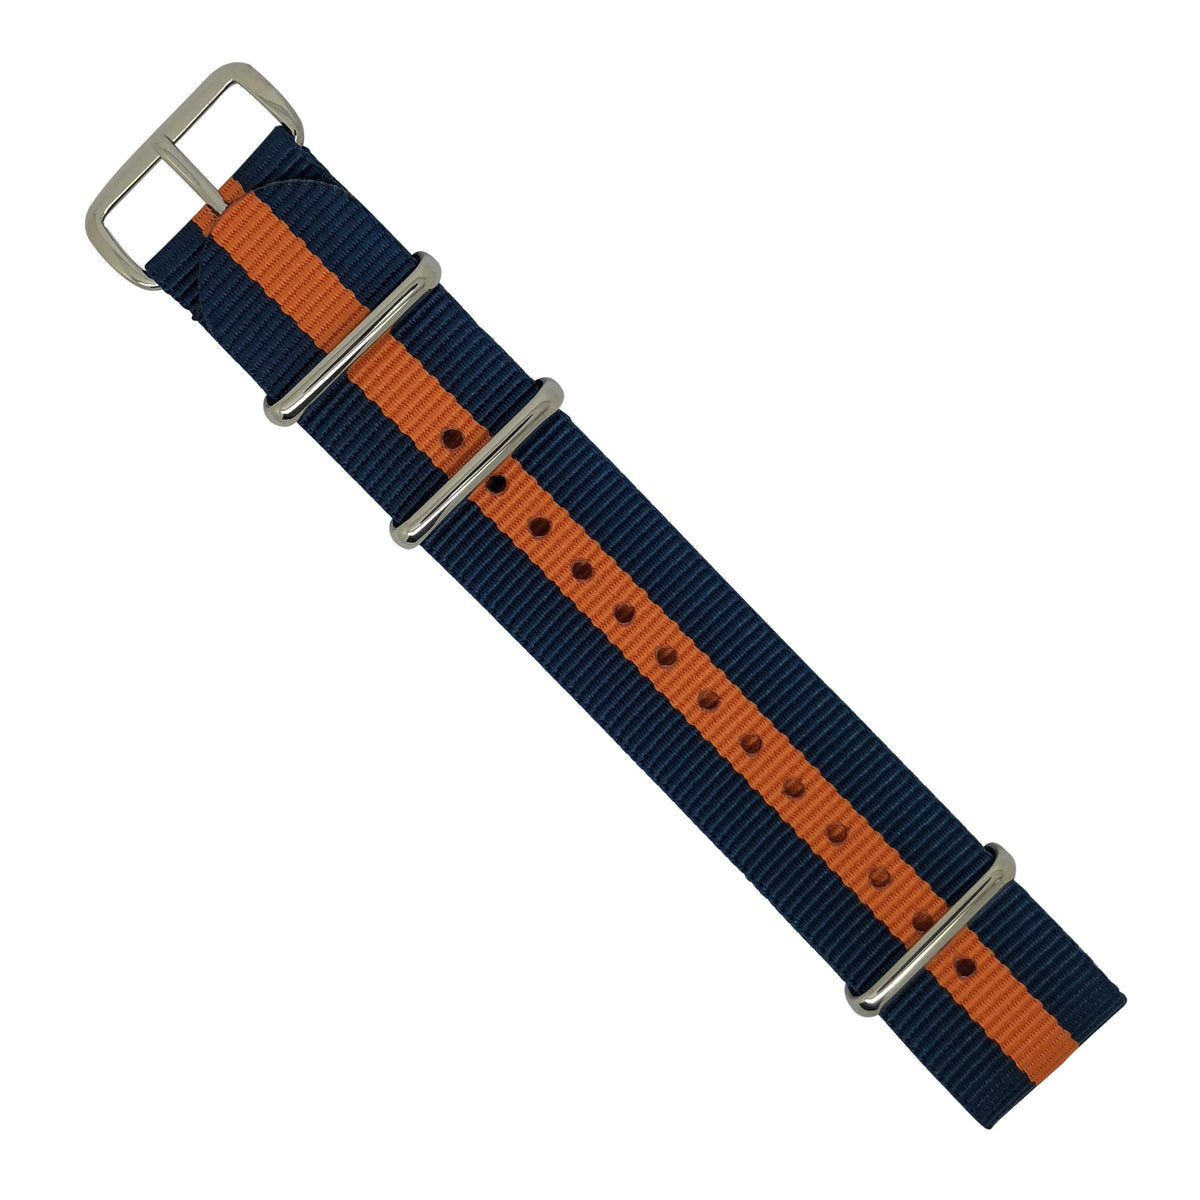 Premium Nato Strap in Navy Orange with Polished Silver Buckle (22mm) - Nomad watch Works